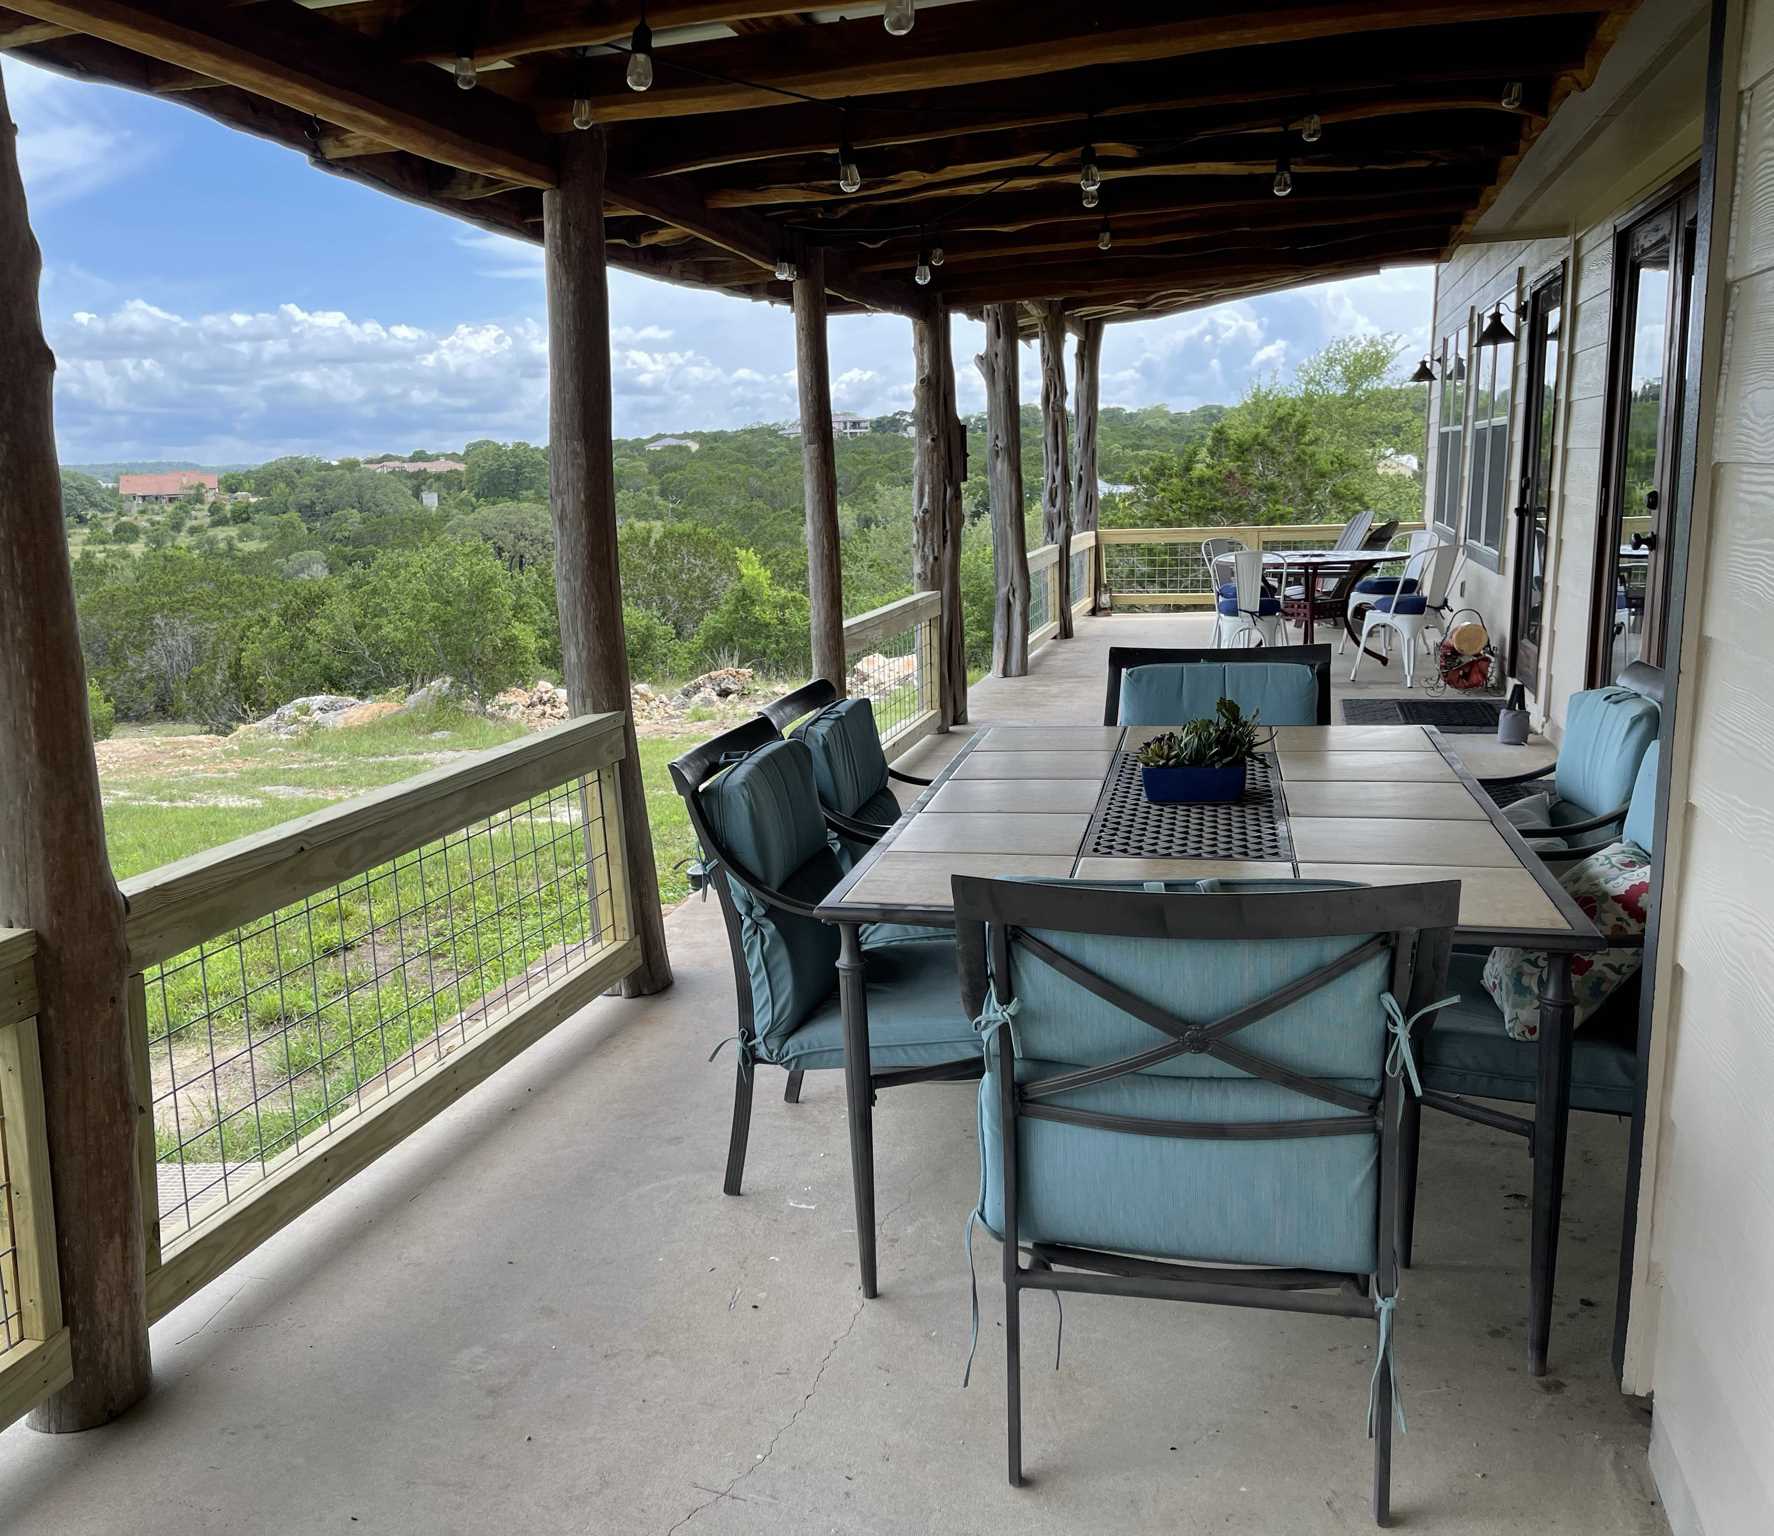                                                 Comfortable seating on the shaded patio gives you incredible Hill Country views from your mountain perch!